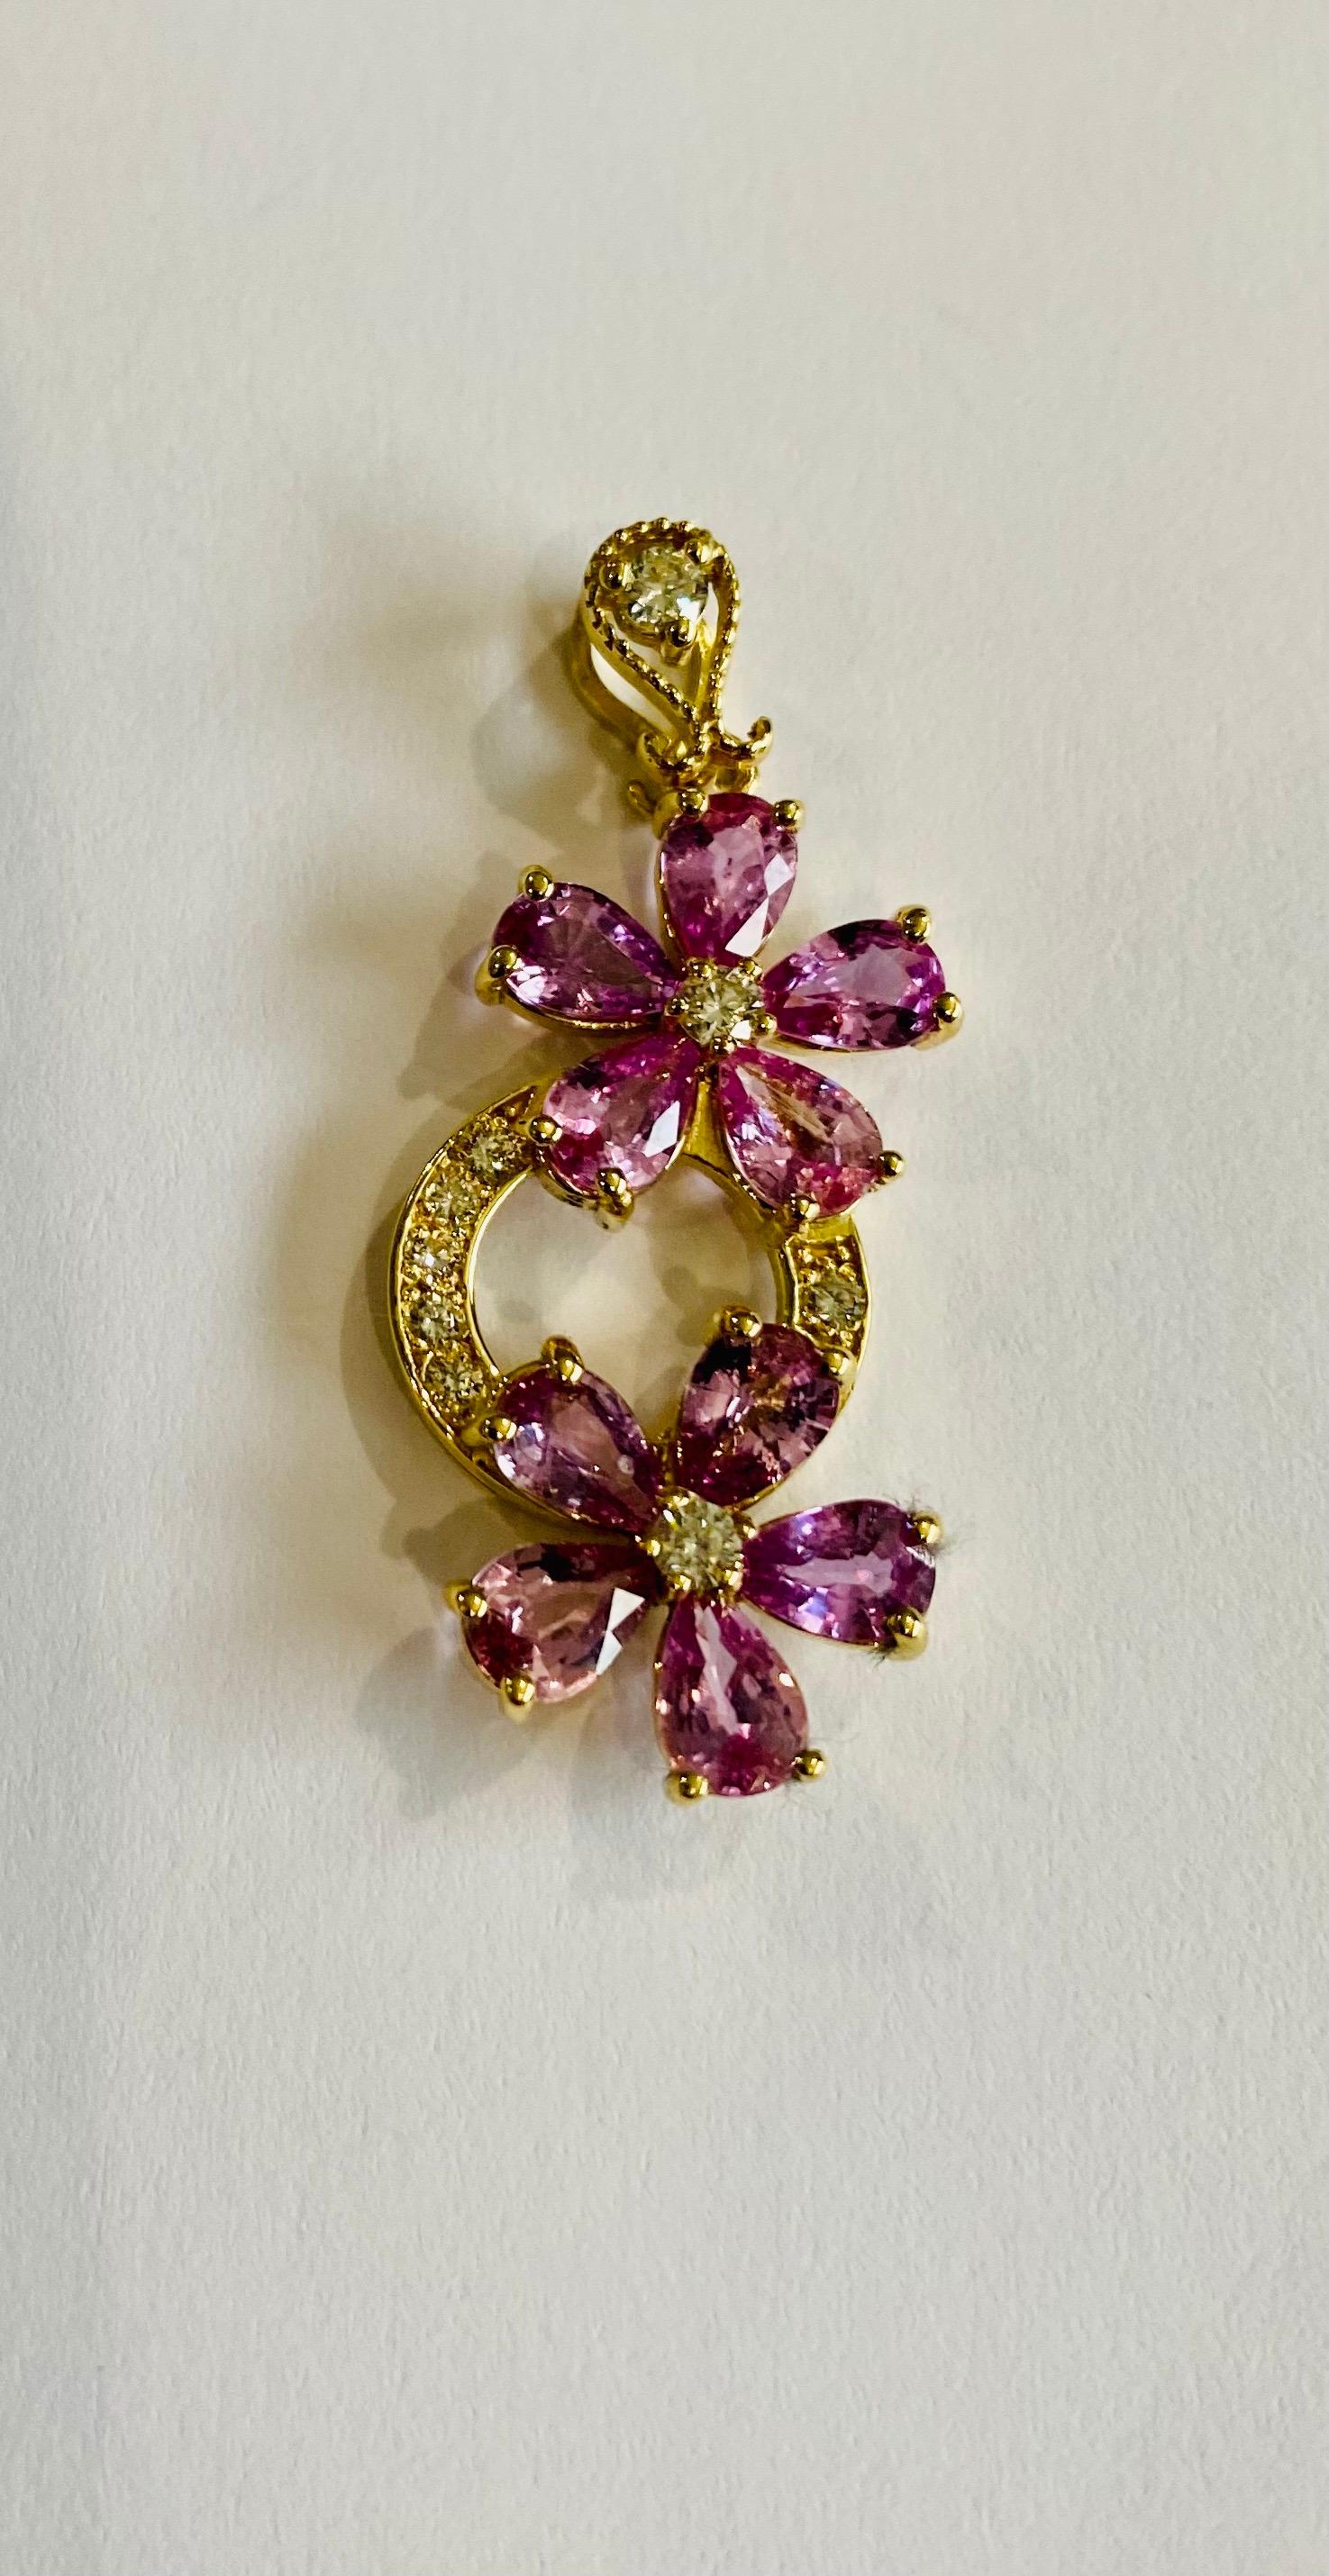 Simply Gorgeous Sapphire Pendant with beautiful hues of Pink and a hint of Purple. 

This beauty will pair wonderfully for any occasion! Even as a daily and classy addition to your collection. 

There are 10 Natural Pear Cut Sapphires that weigh a